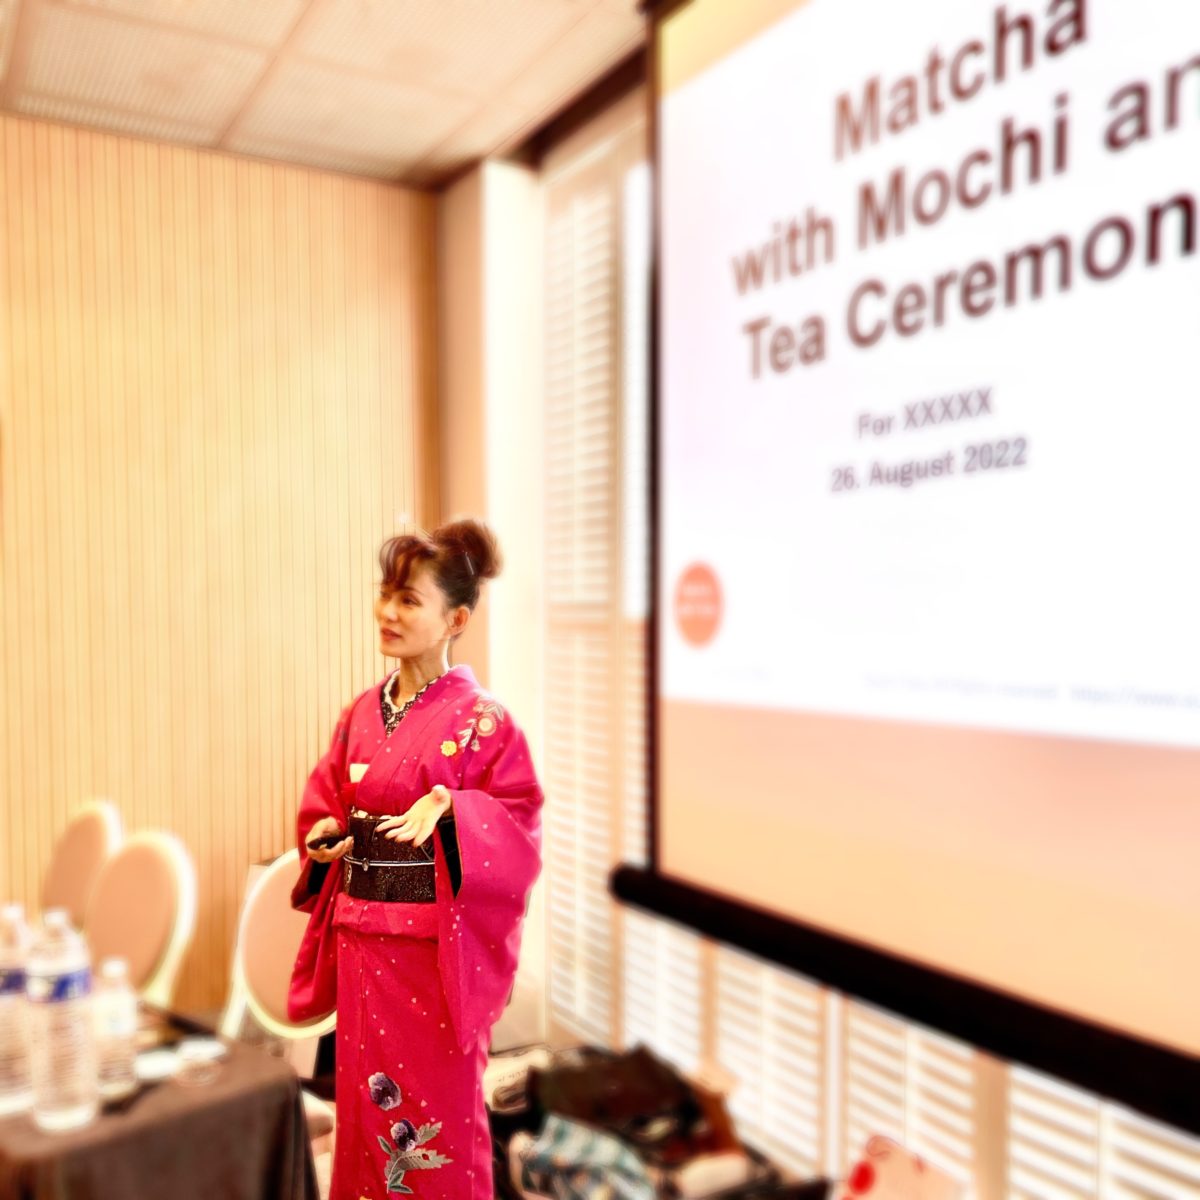 Matcha seminar and Tea ceremony on a table in Paris